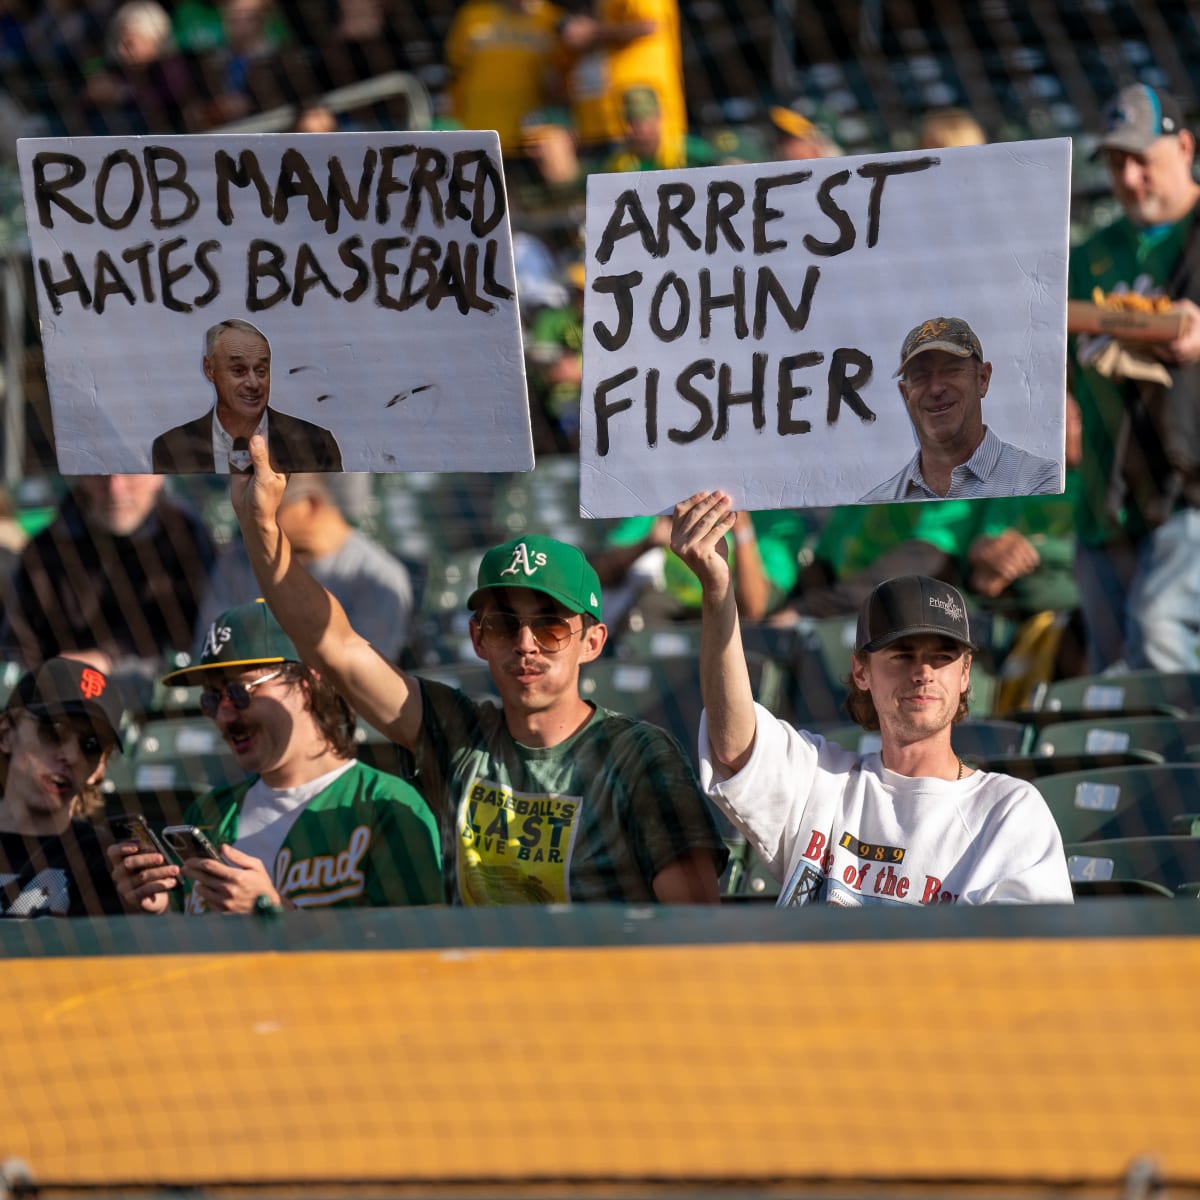 A's Fans Reverse Boycott Shows There's Plenty of Fight in